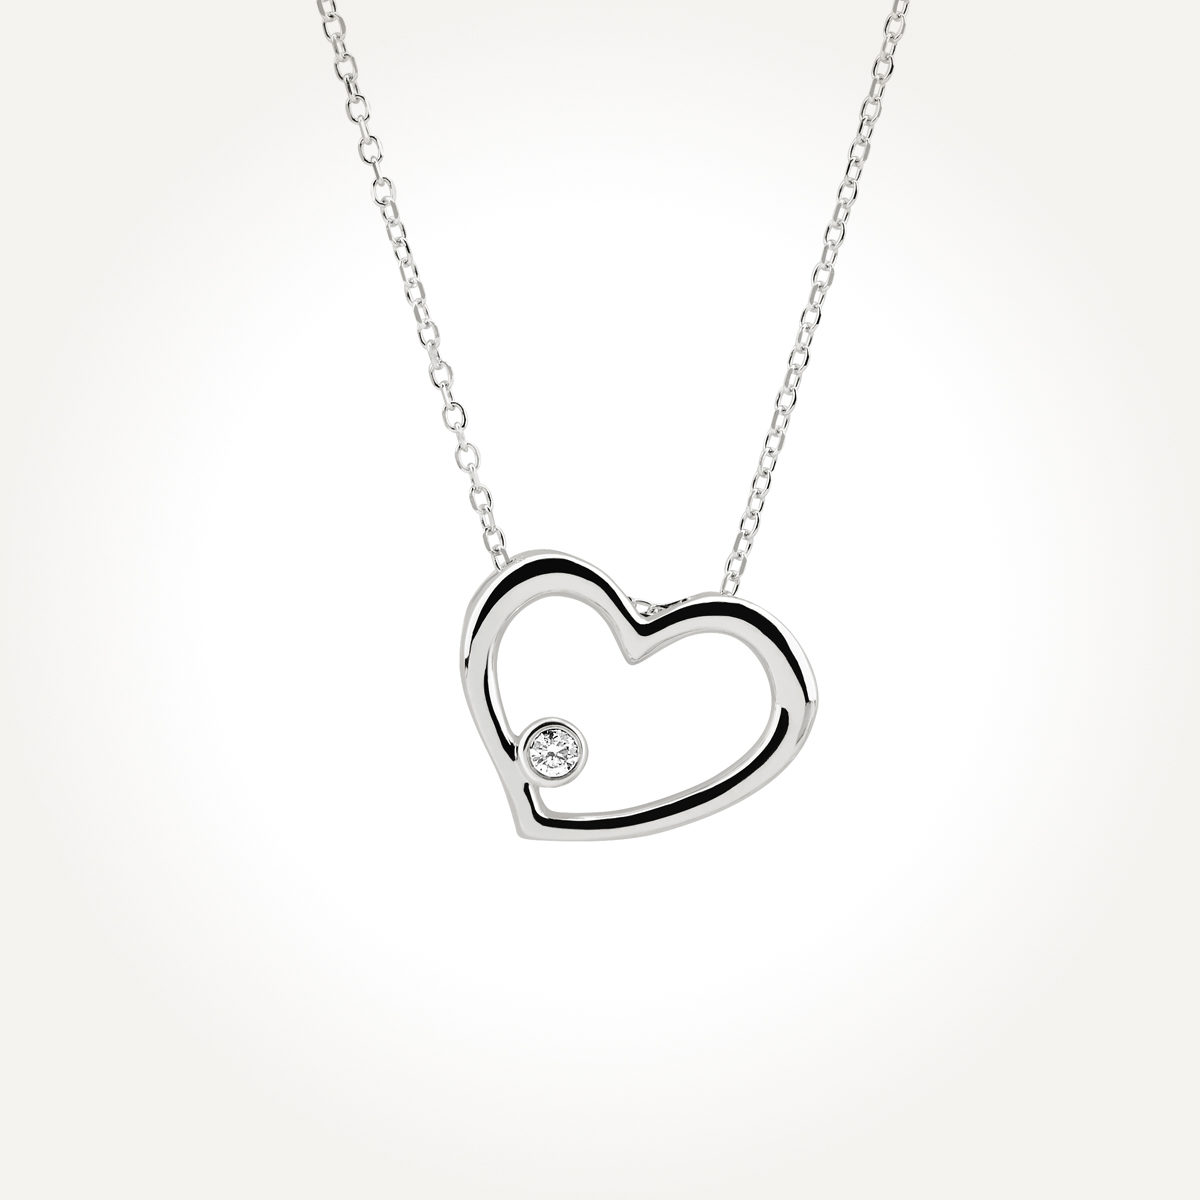 14KT White Gold Solitaire Heart Pendant 0.02 CT. T.W.